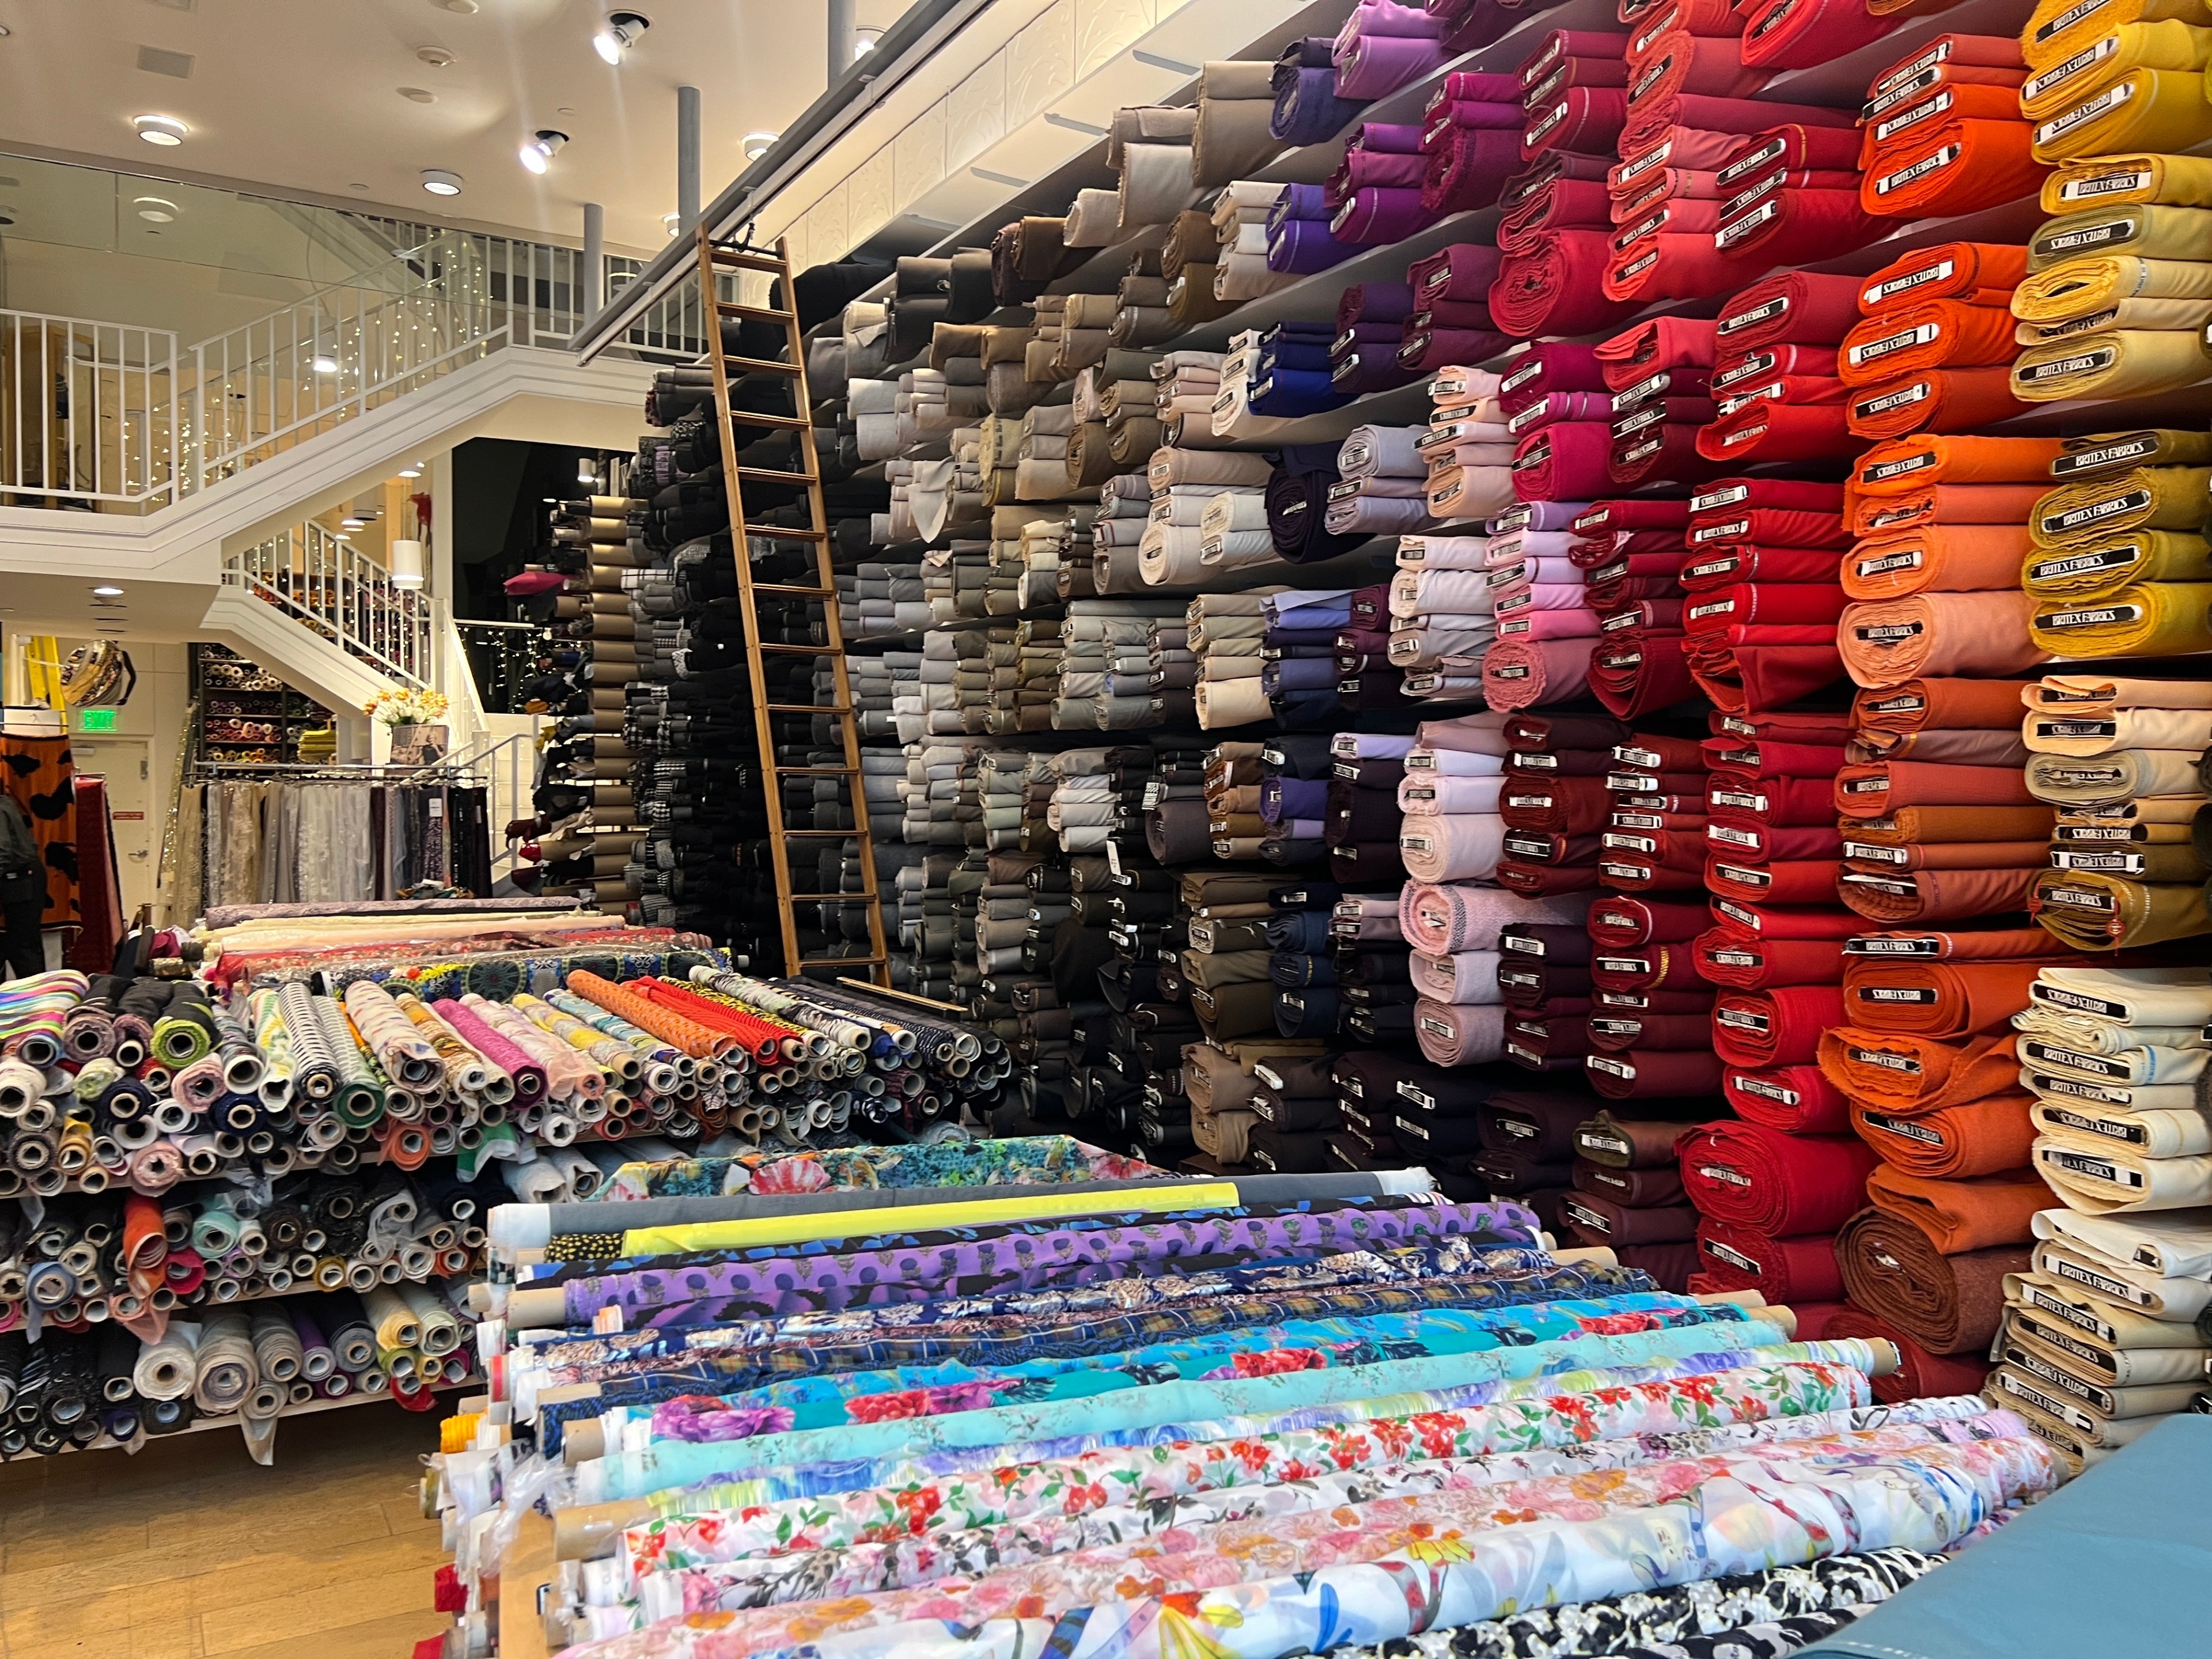 A wall is crowded with bolts of fabric that are organized by color, ranging from black and gray to purple, red and yellow.